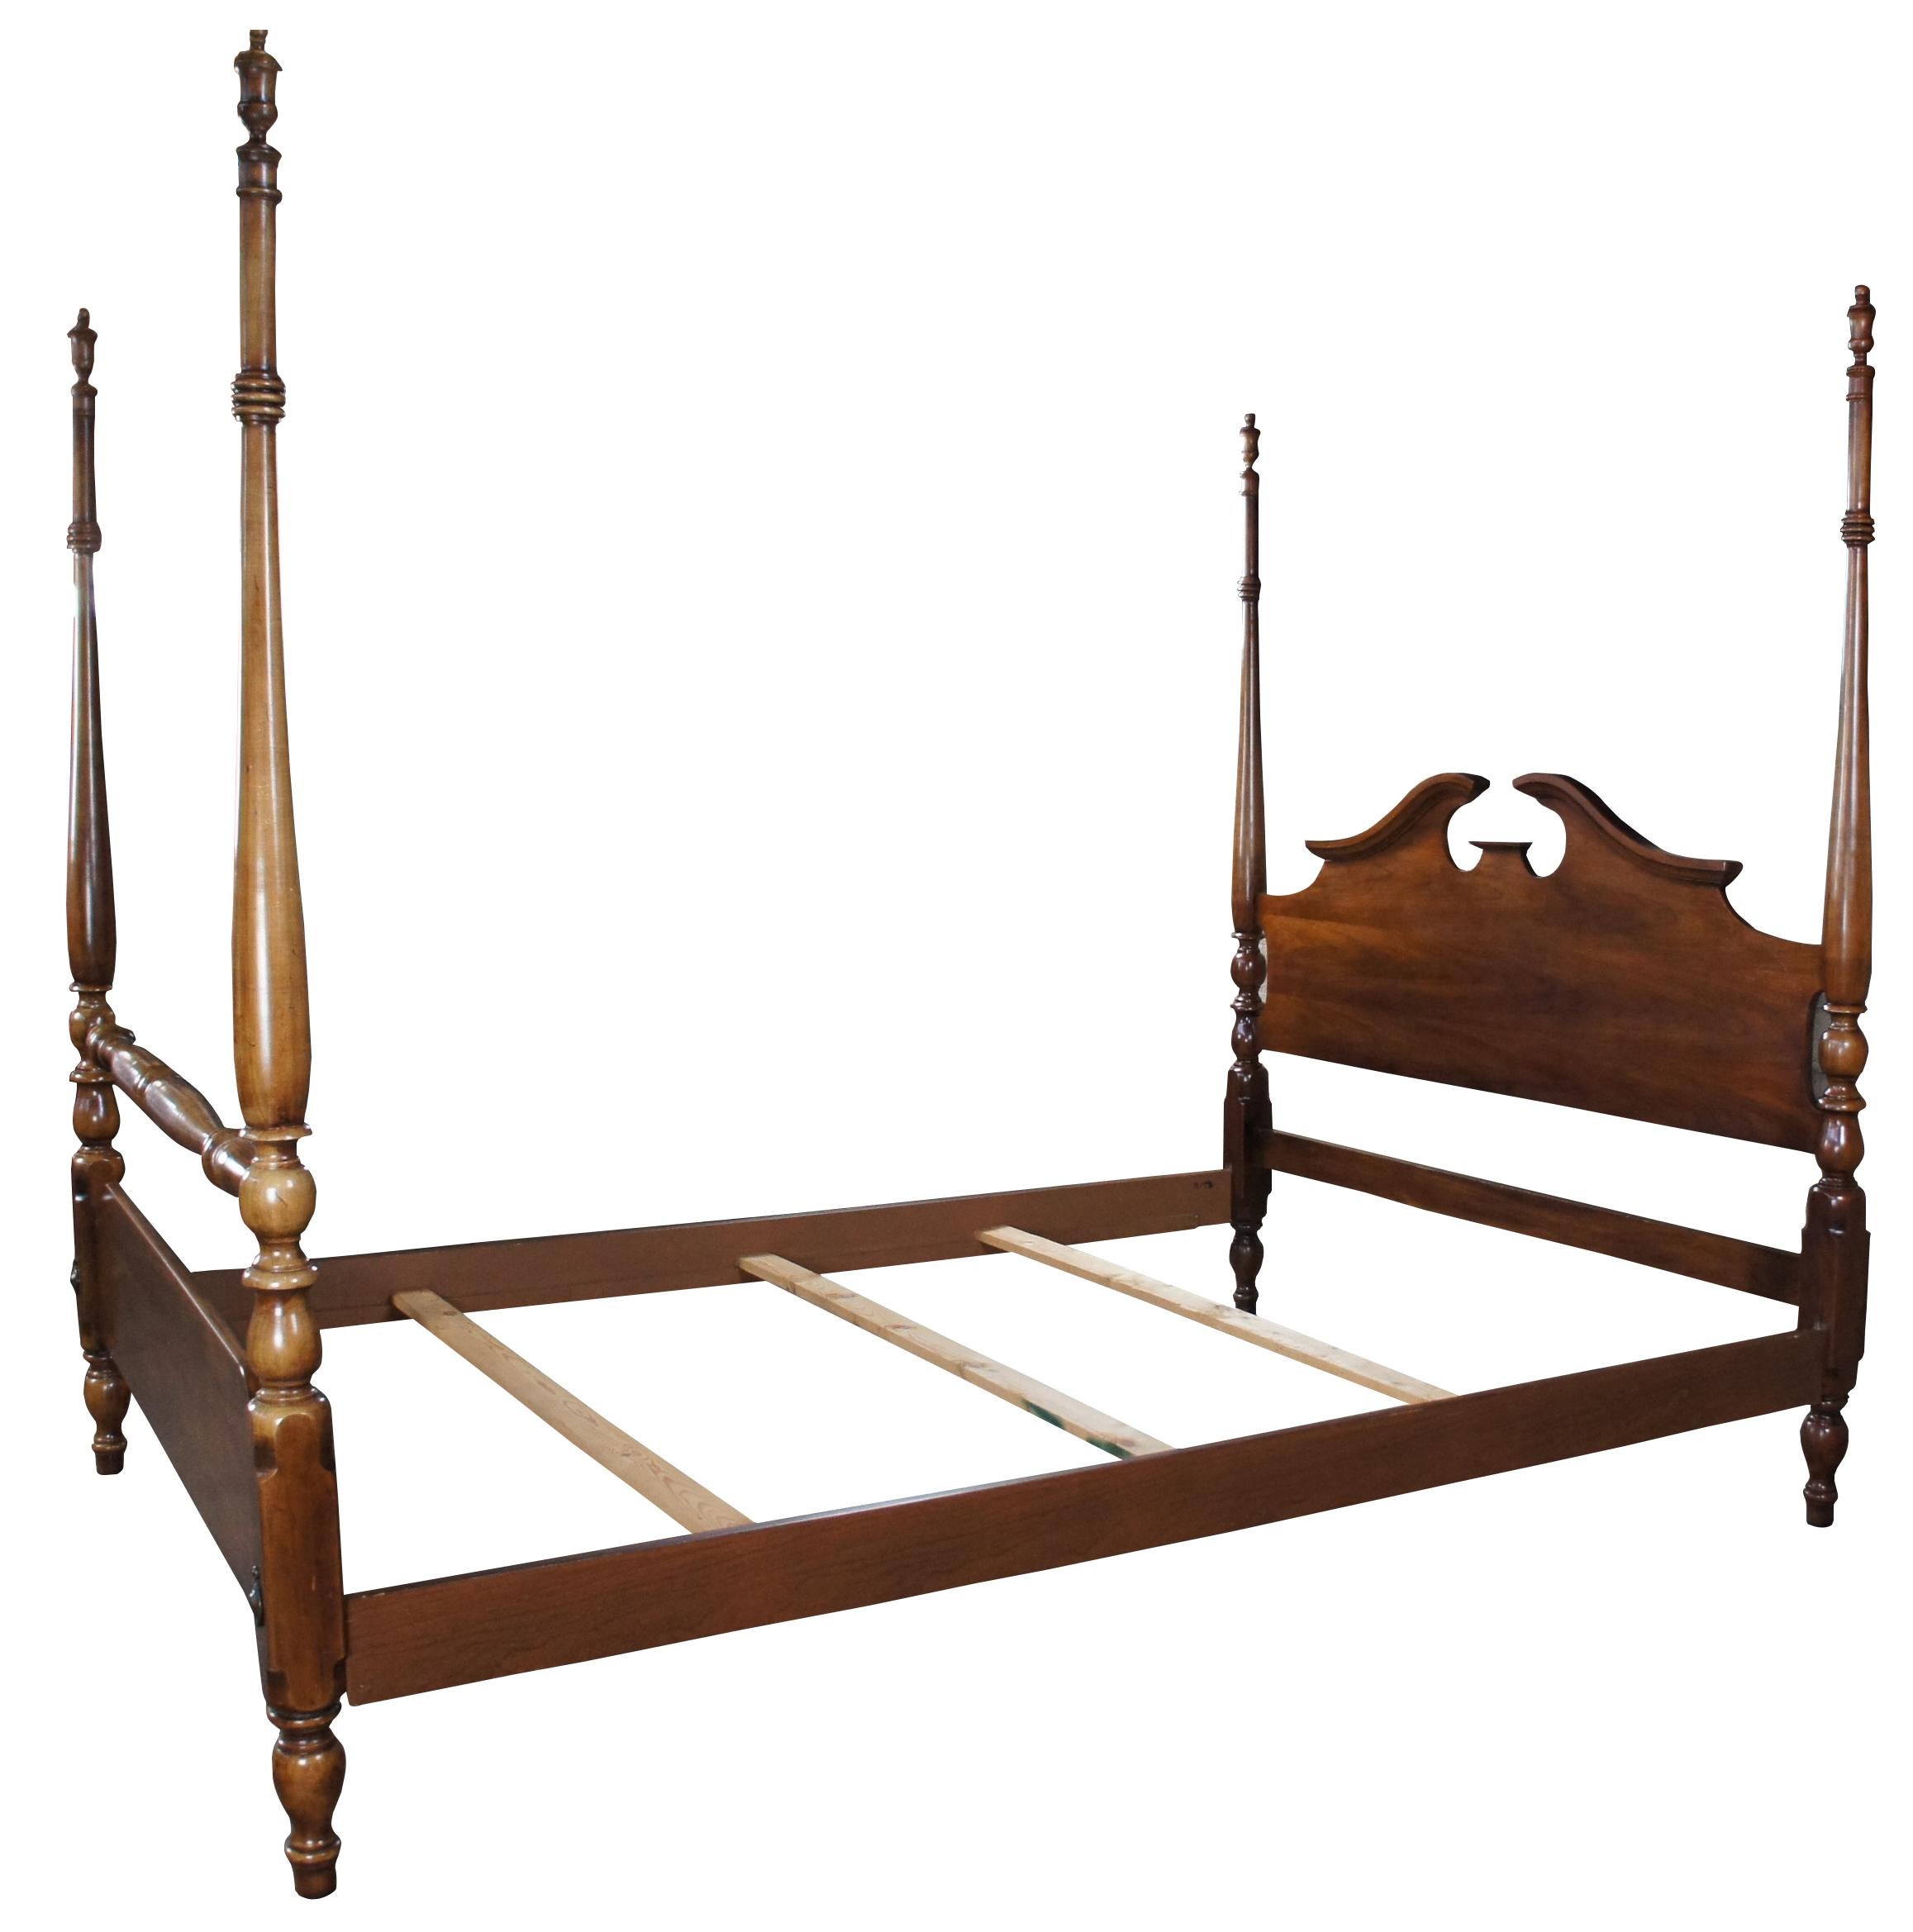 Thomasville Collectors Cherry Georgian Style Queen size four poster bed, circa 1978. Features an open pediment and high turned posts with chamfered corners and trophy finials. Naturally distressed finish. Number 10111- 475, DEO-02-9

Measures: